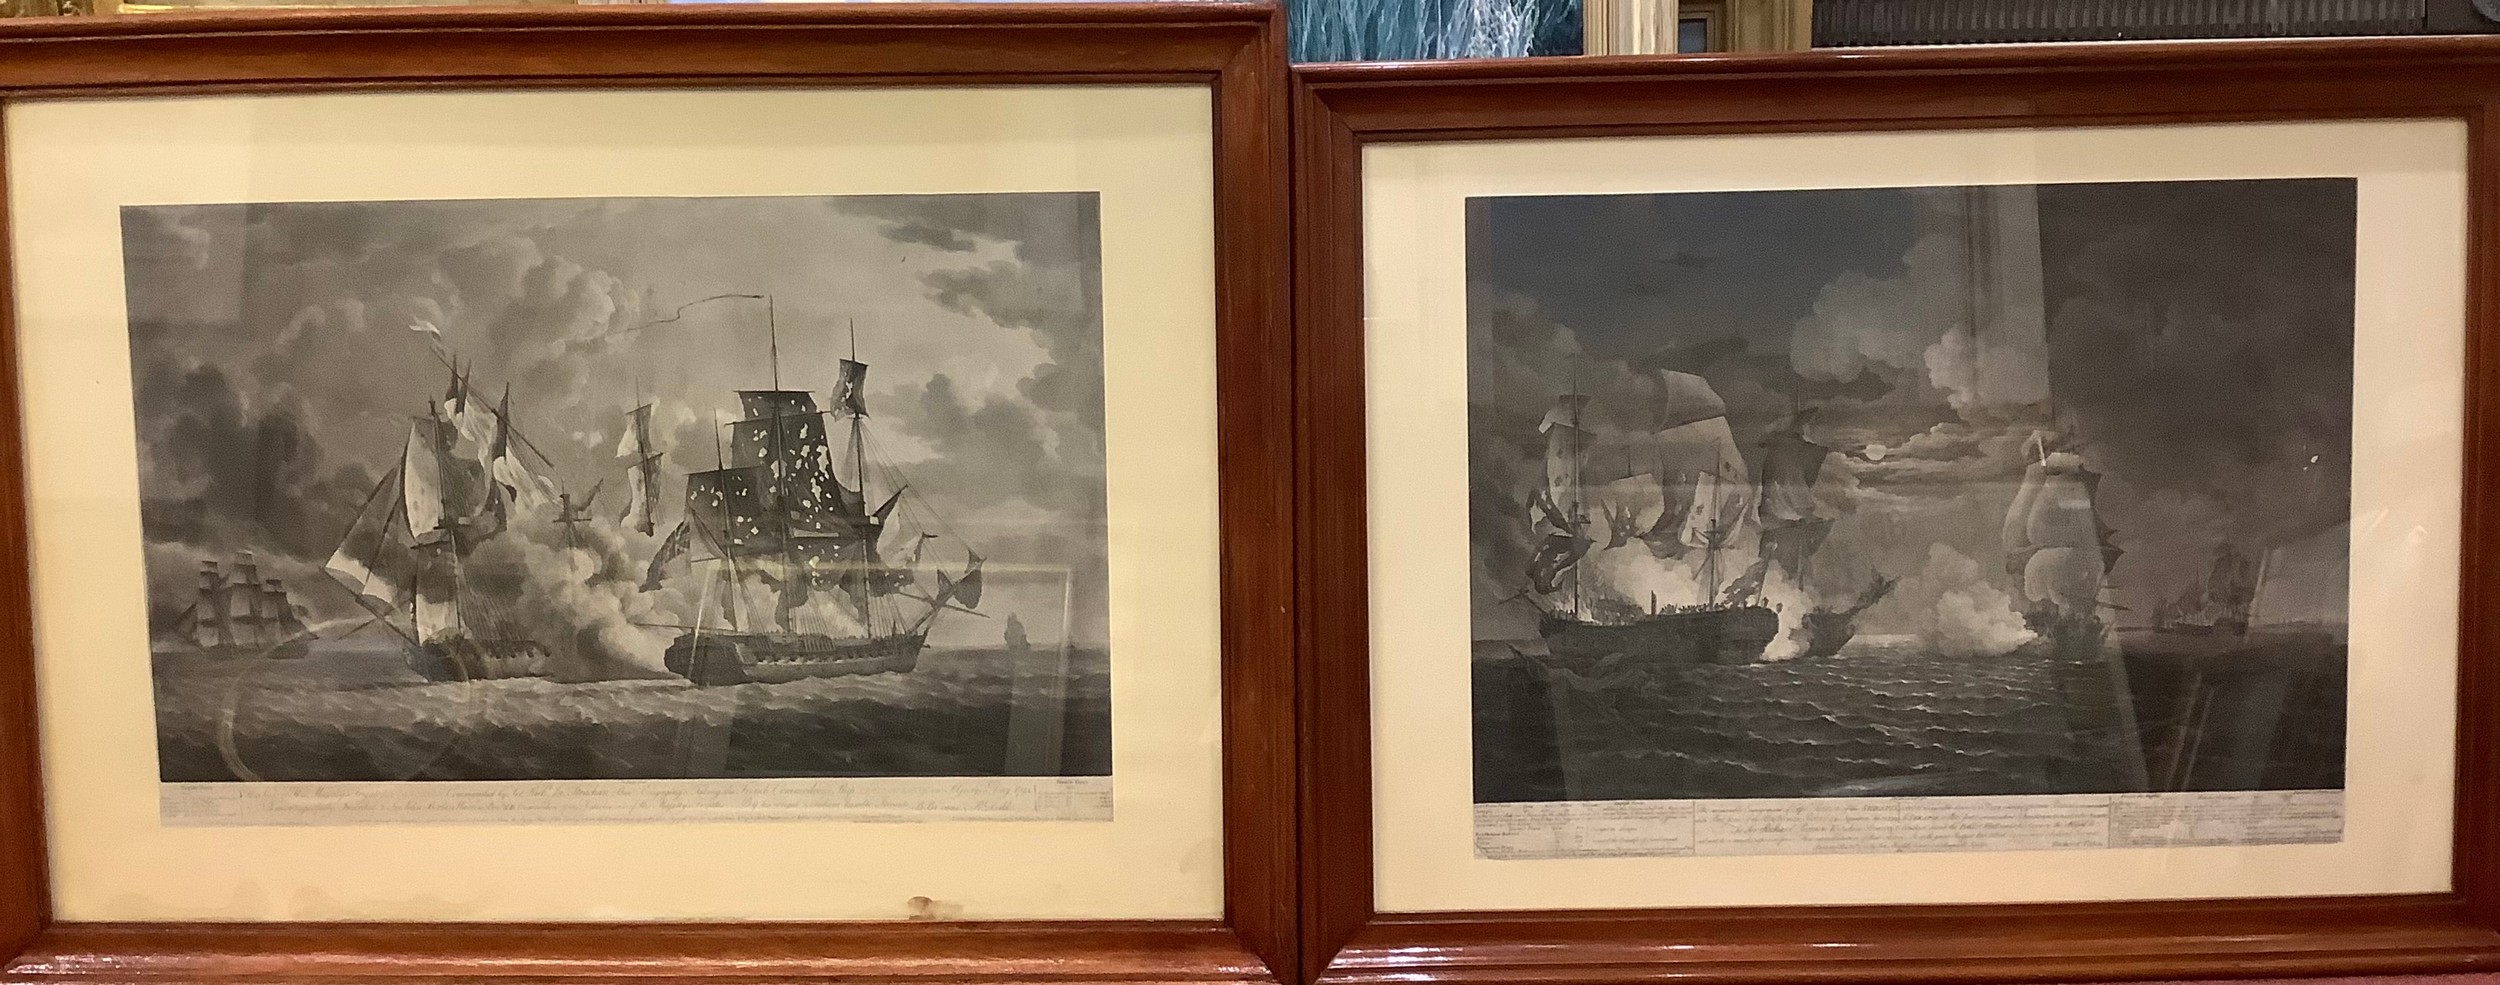 Two monochrome engravings, 'A memorable Engagement of Captn Pearson of the Serapis with Paul Jones